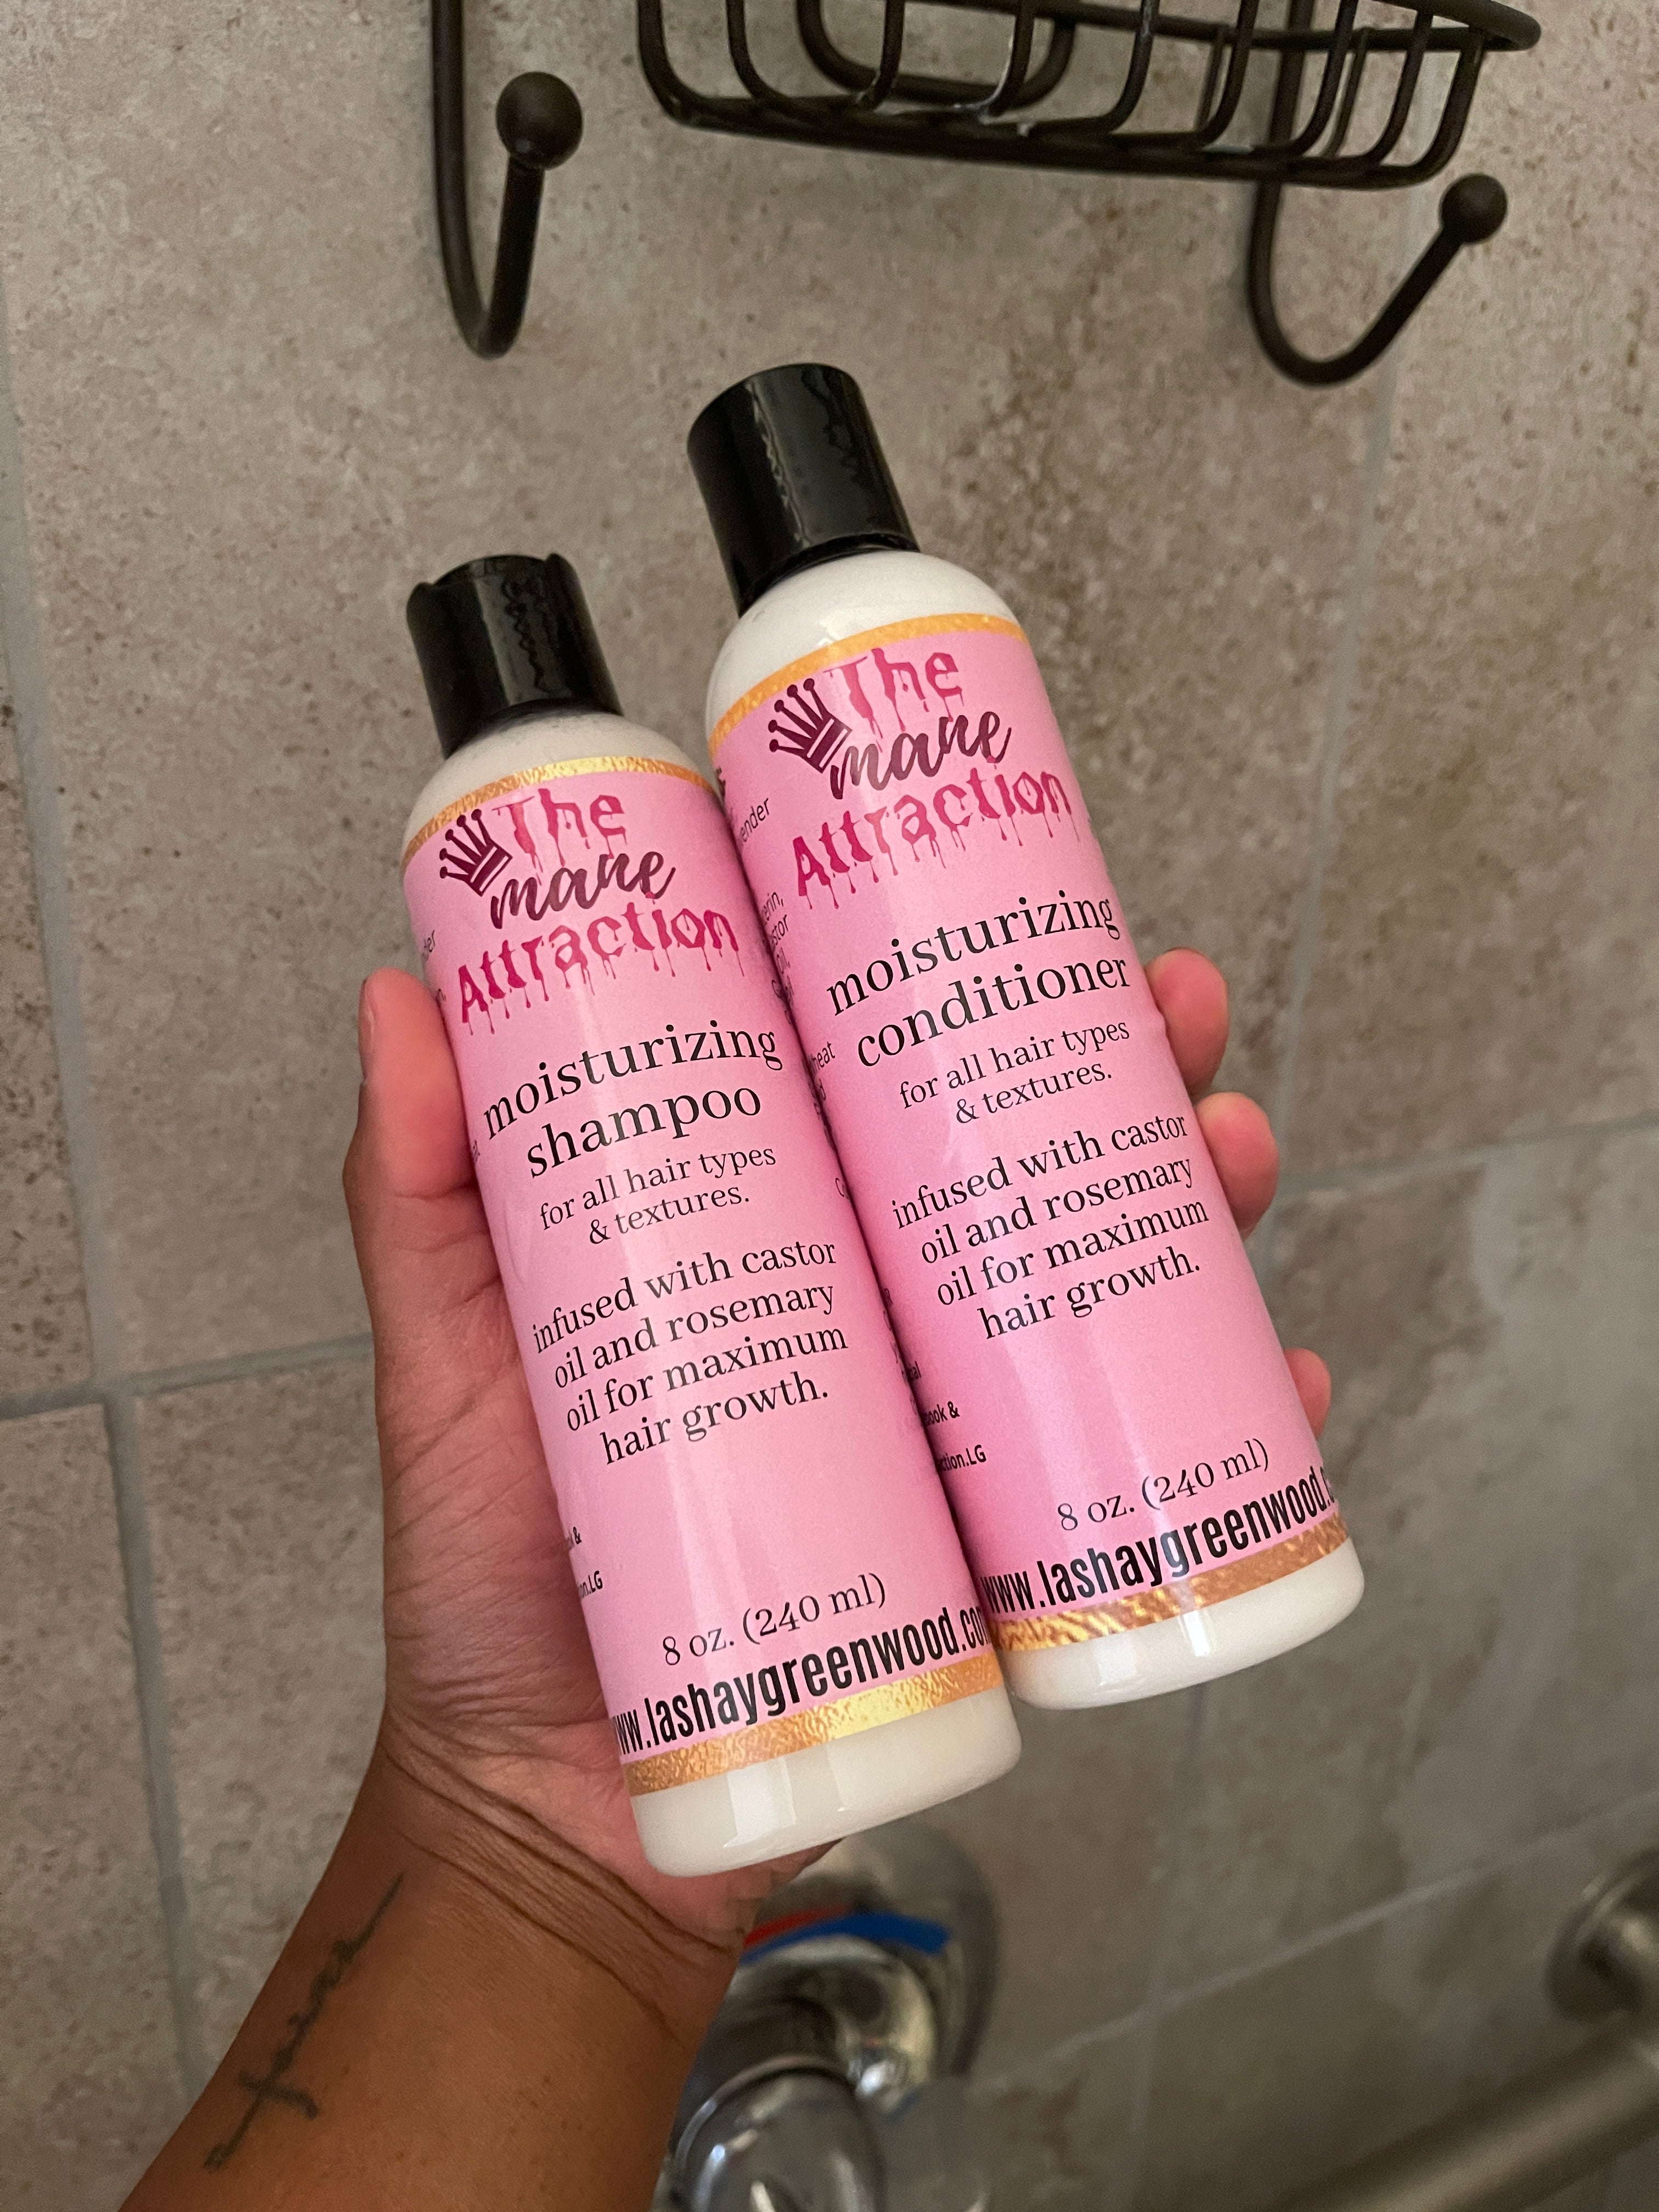 Wholesale Shampoo/Conditioner Duo - The Mane Attraction